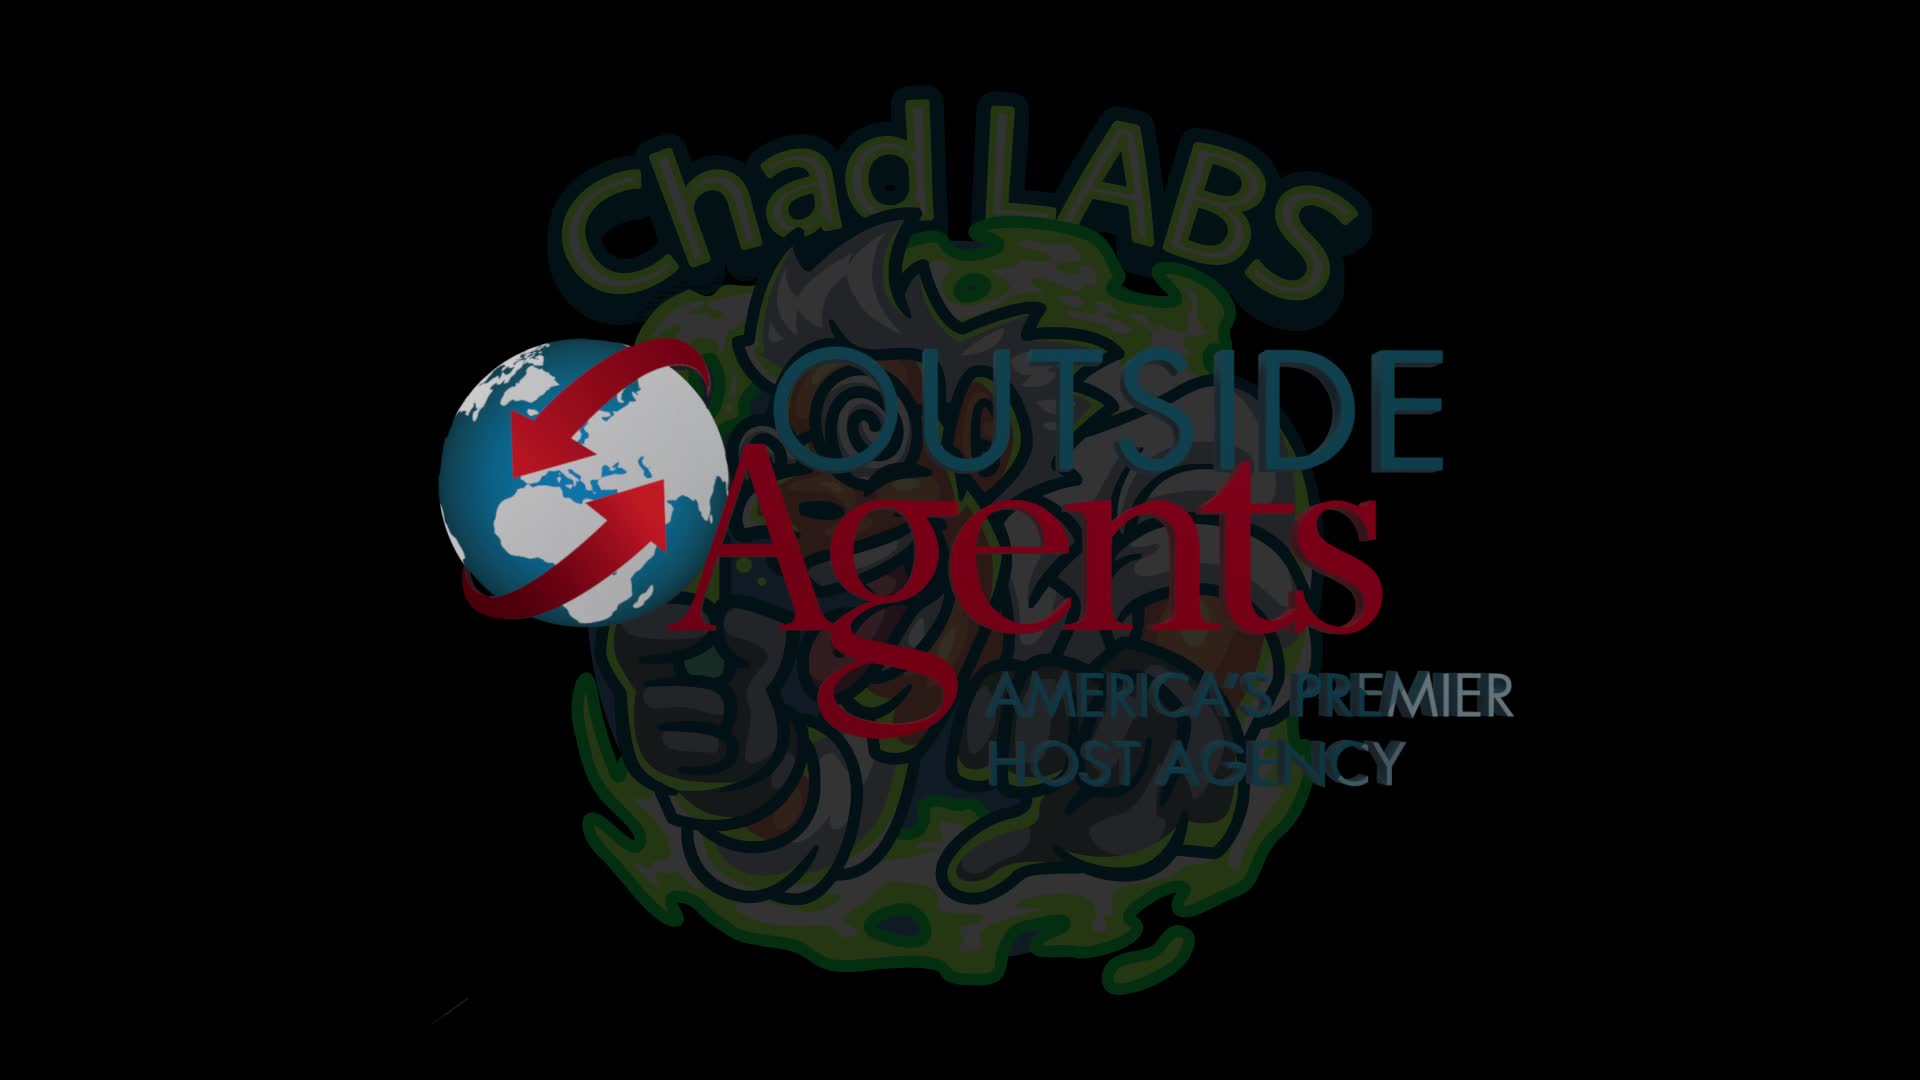 oa logo in front of chad lab 001.mp4